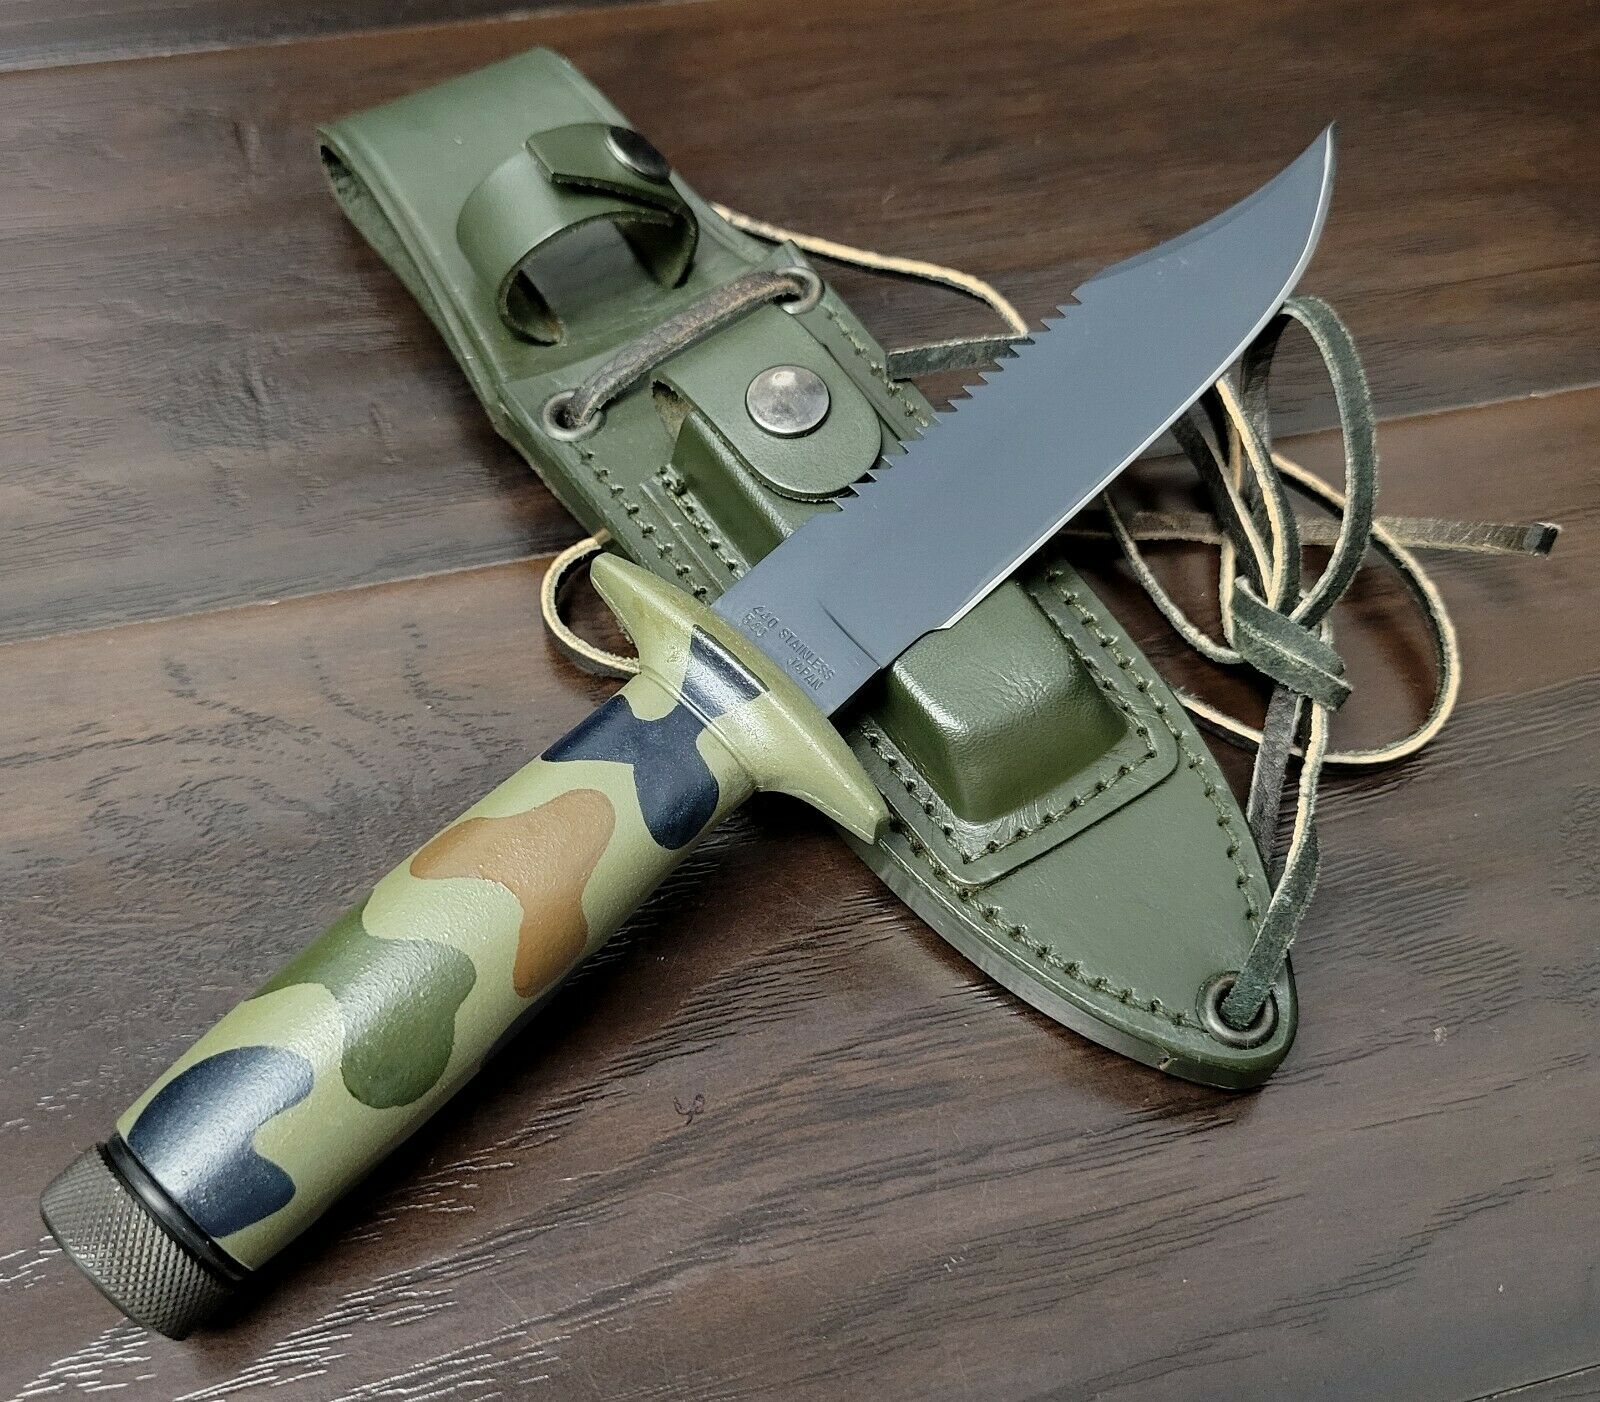 Valor Miami, U.s.a. Fixed Blade Boot 5.4" Knife - 440 Stainless 540 Japan